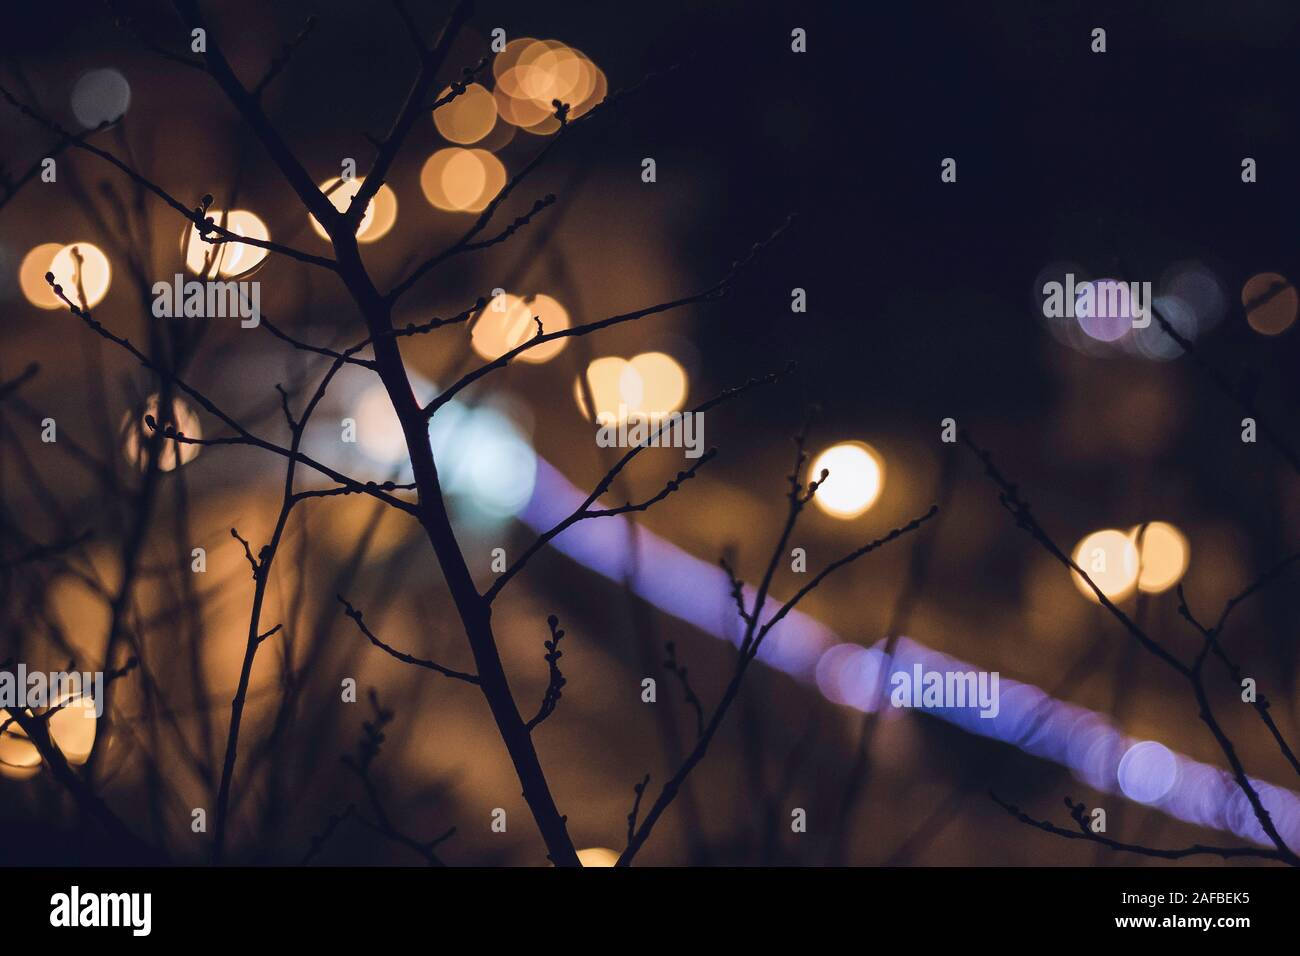 Abstract bokeh and lights out of focus behind tree branches in the city. Stock Photo